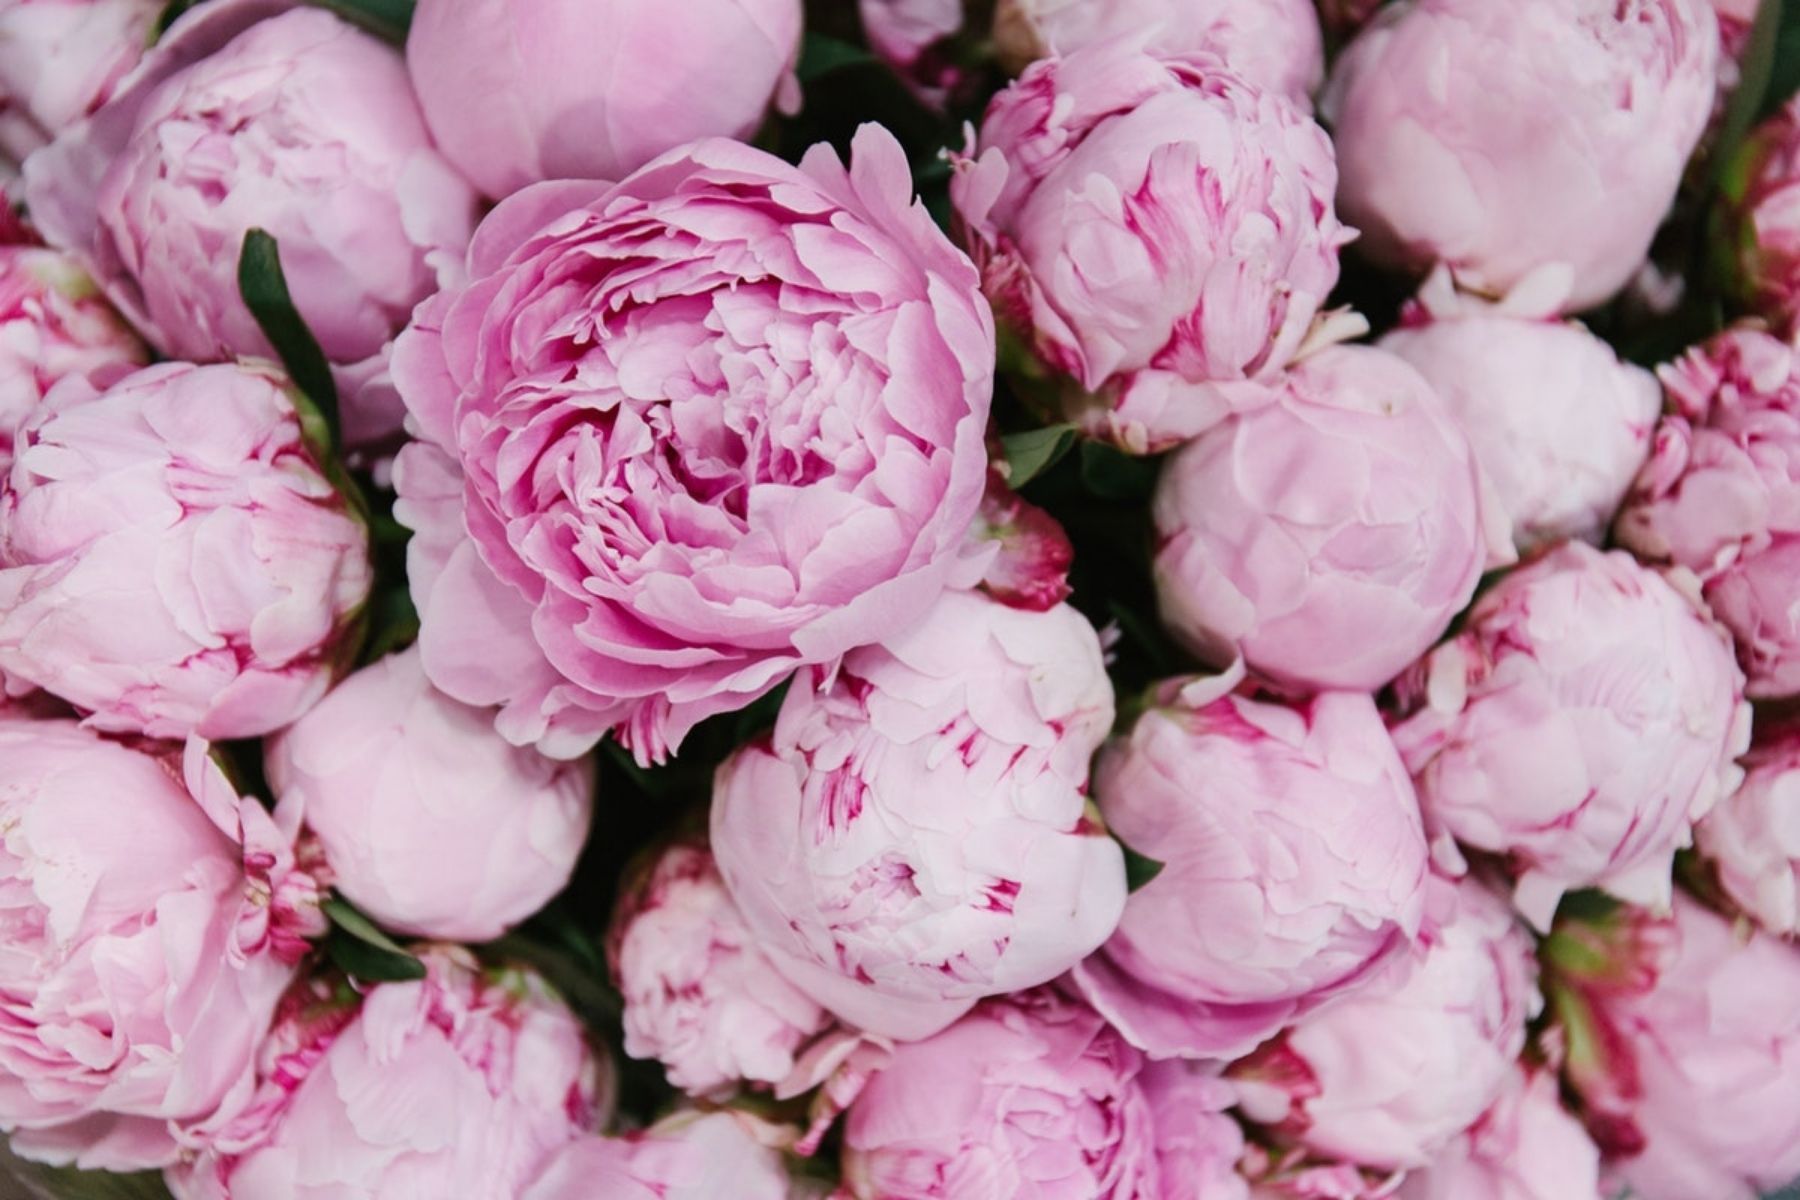 Peonies are the perfect romantic flowers for Mother's Day - A Blog by Regine Motmans on Thursd